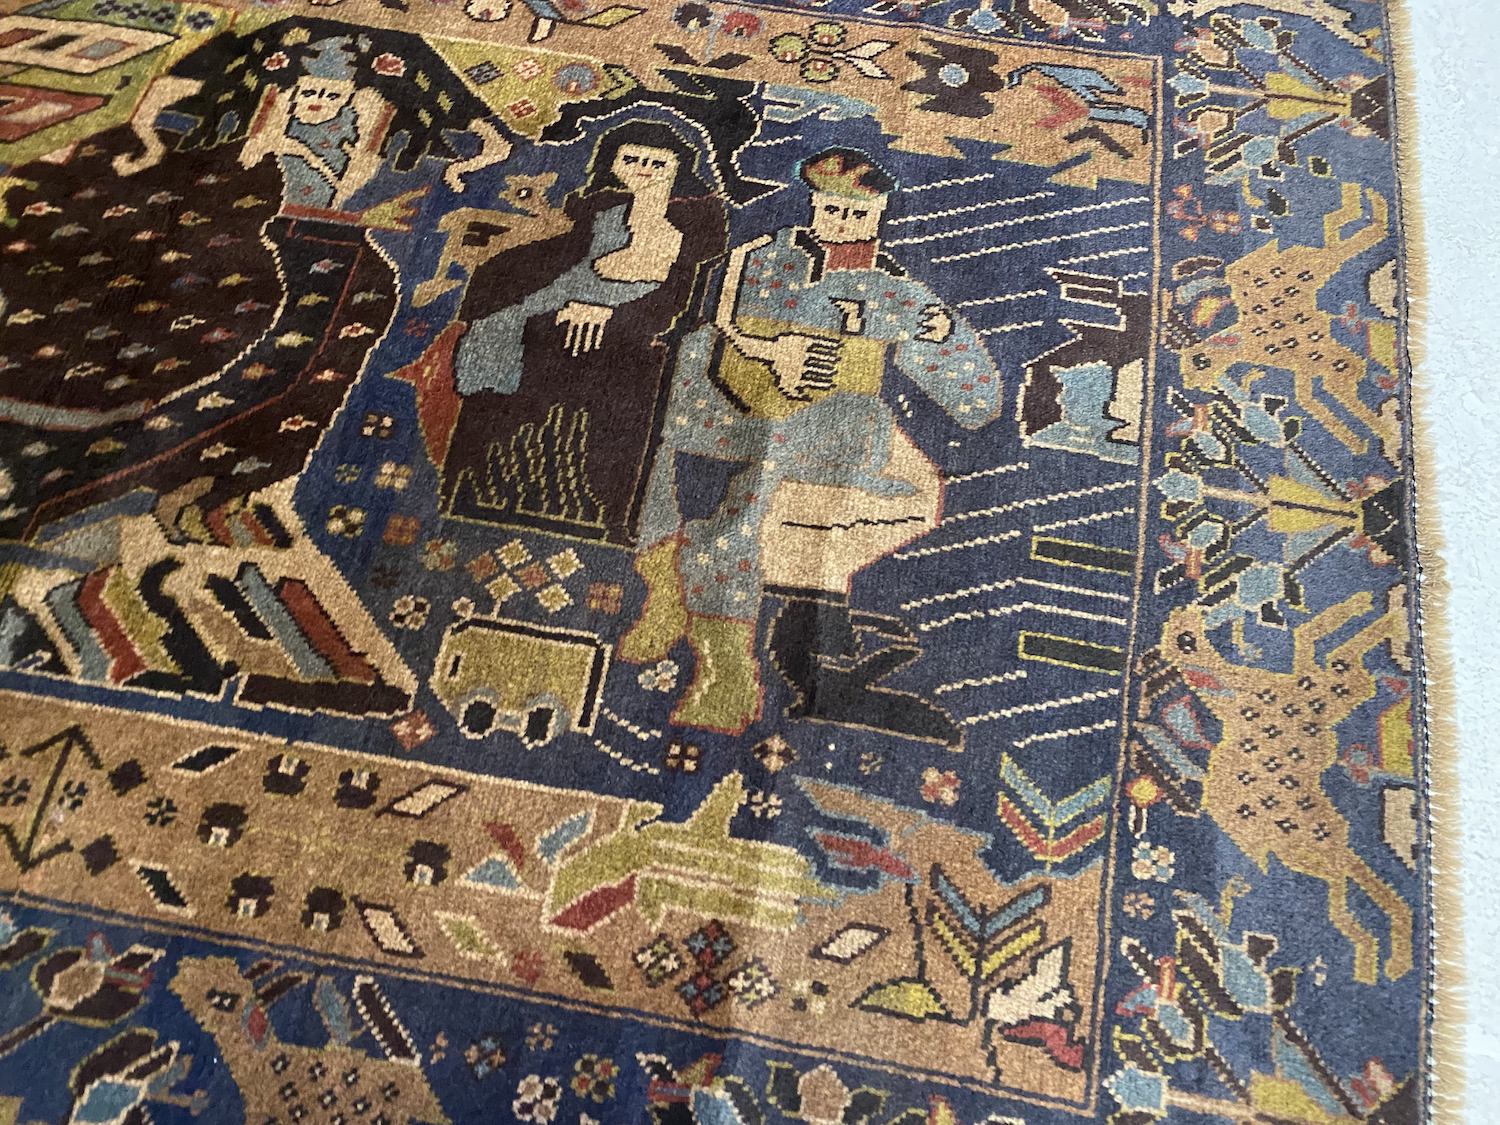 Detailed hand woven Afghan Pictorial Rug depicting figures around a fire near a caravan, along with deep blue hues with beige, black and pale green details of plants and animals. Perfect for a bedroom, living room, studio or study.Available from King Kennedy Rugs Los Angeles